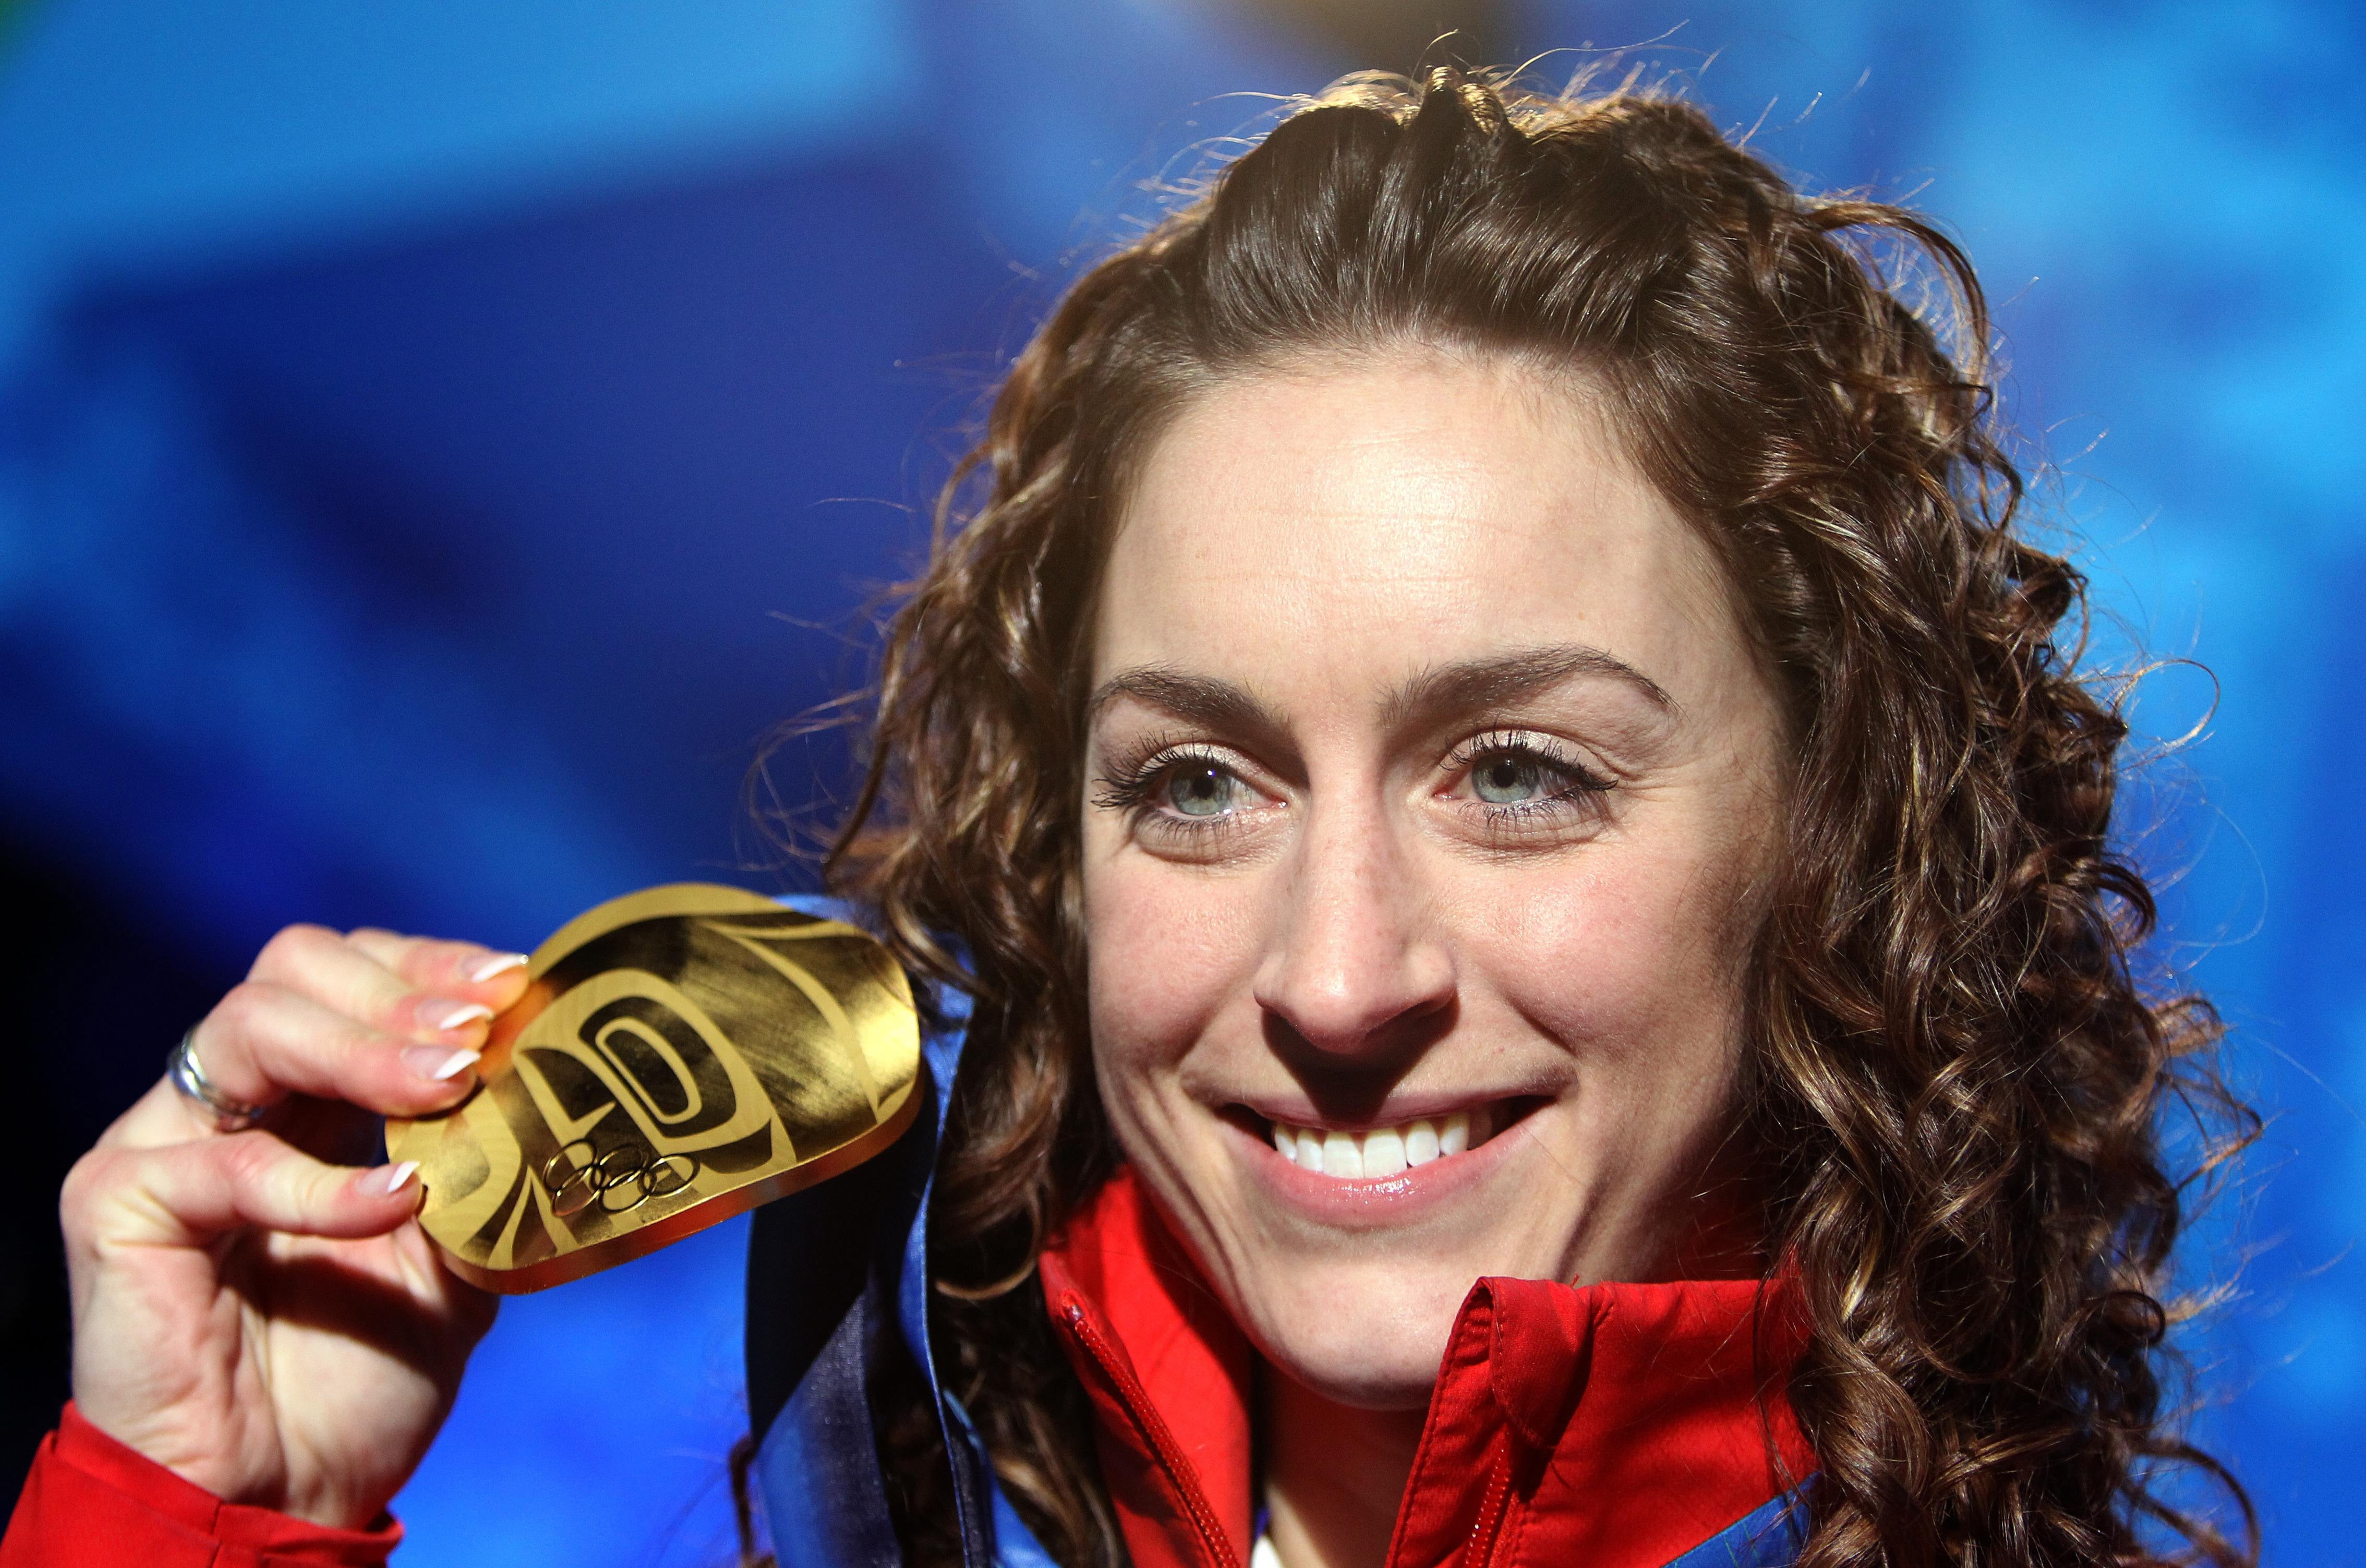 Amy Williams provided one of Team GB’s greatest Winter Olympic moments in 2010